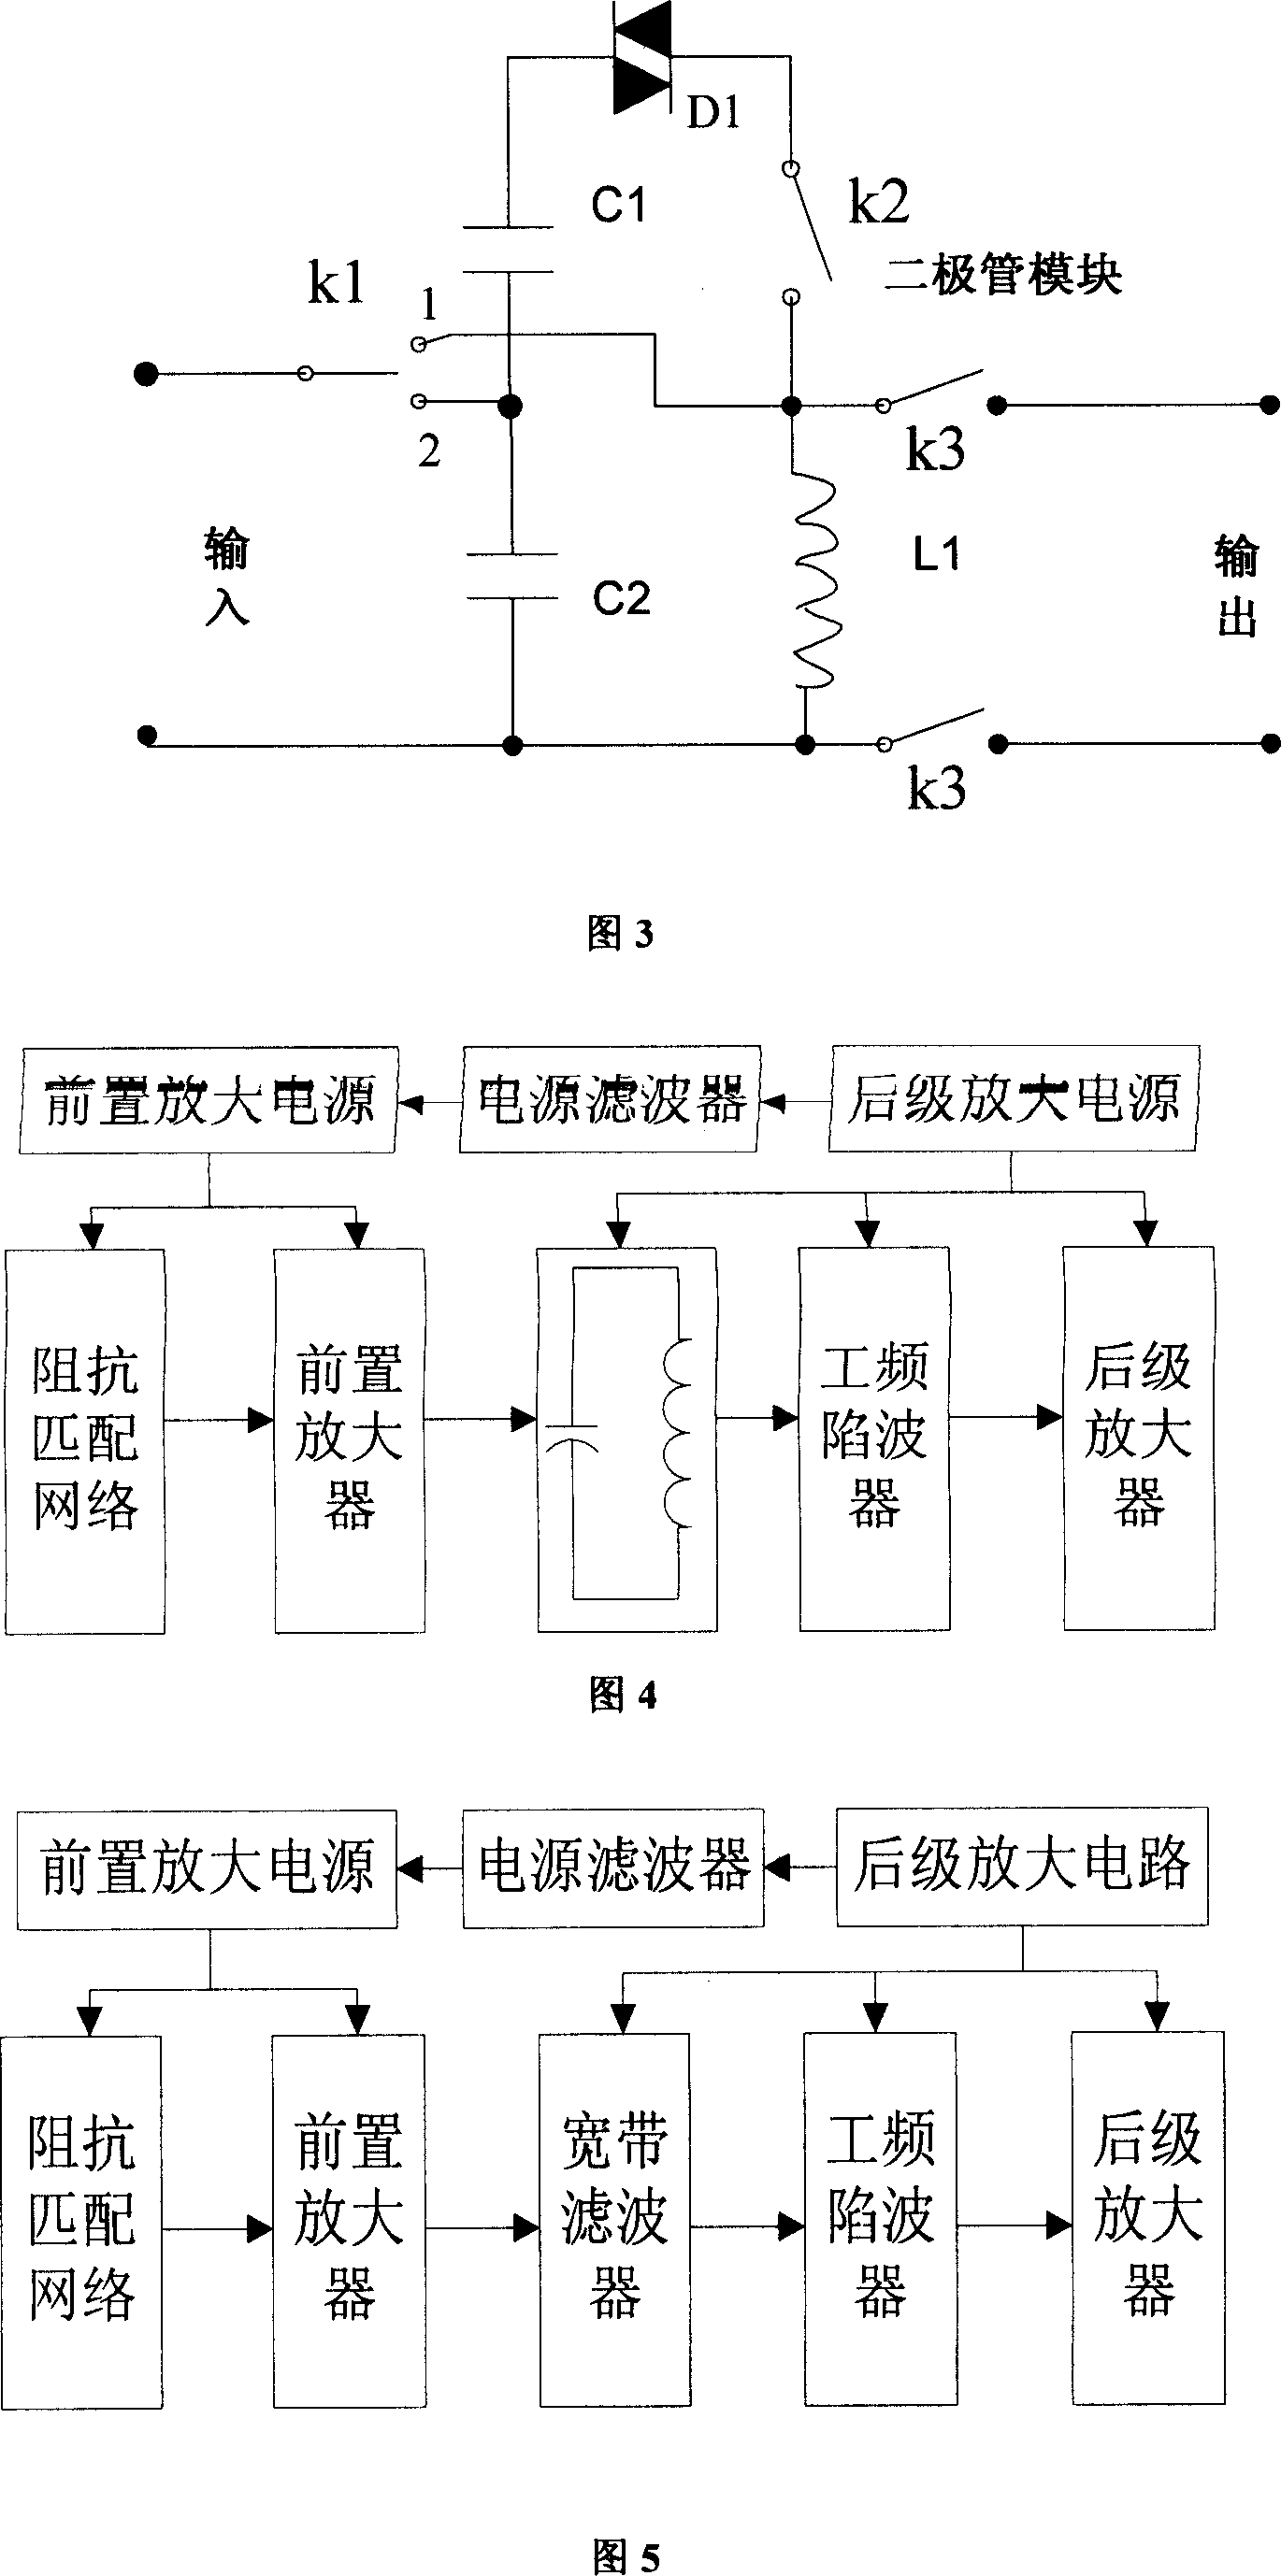 Nuclear magnetic resonance and transient electromagnetic combined instrument and method